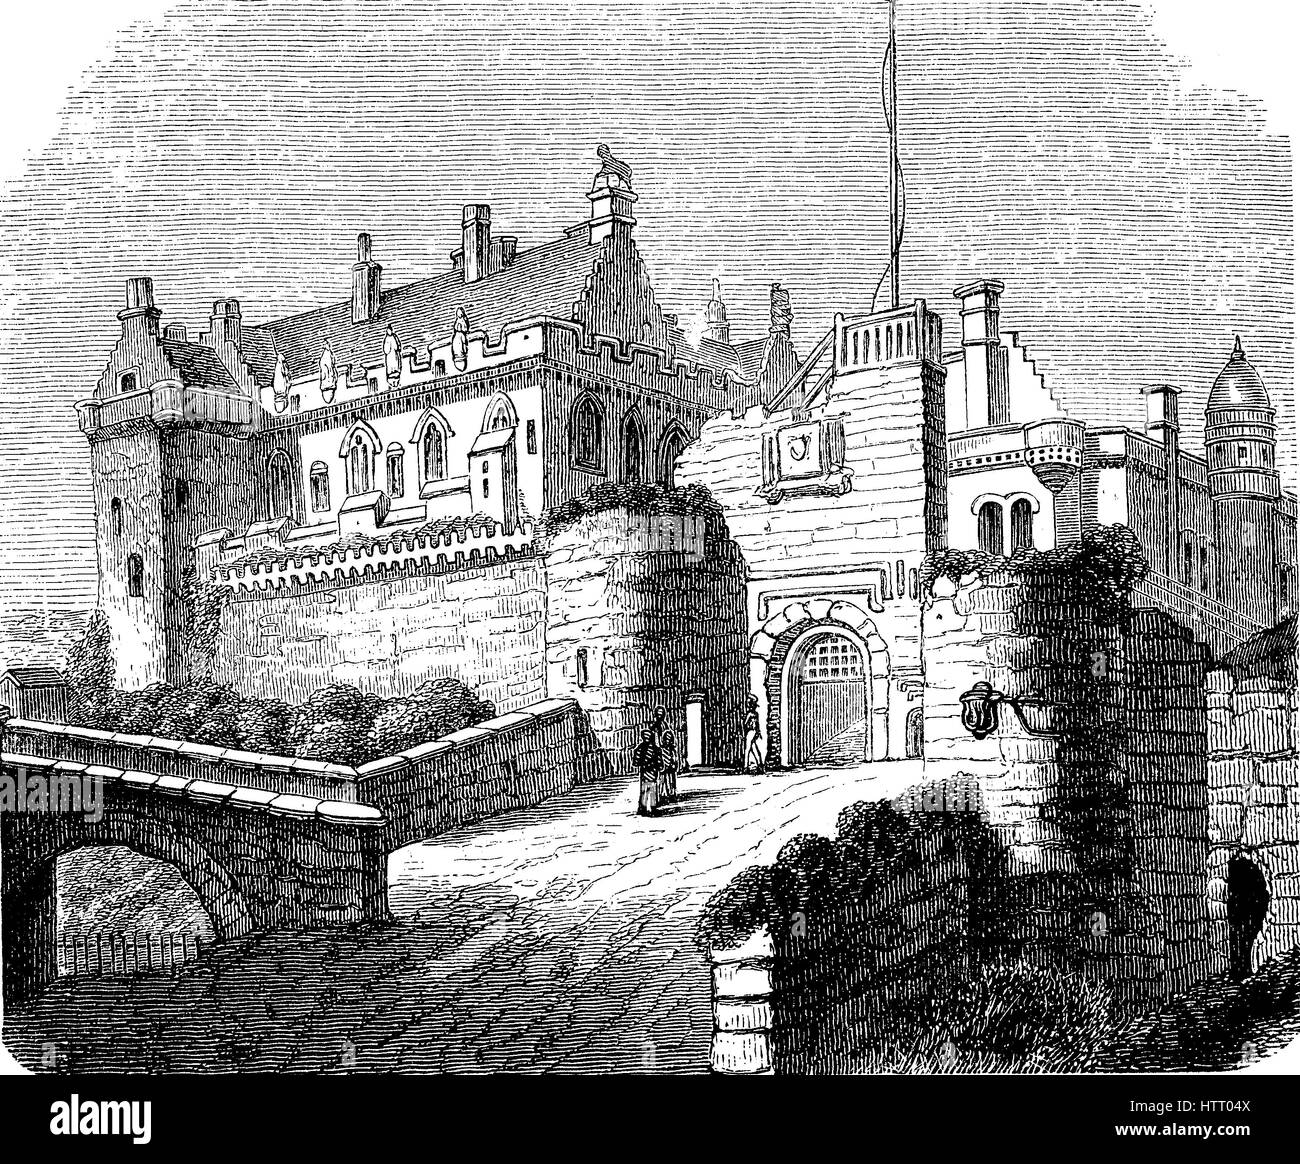 Stirling Castle, located in Stirling, is one of the largest and most important castles in Scotland, reproduction of a woodcut from the year 1880, digital improved Stock Photo